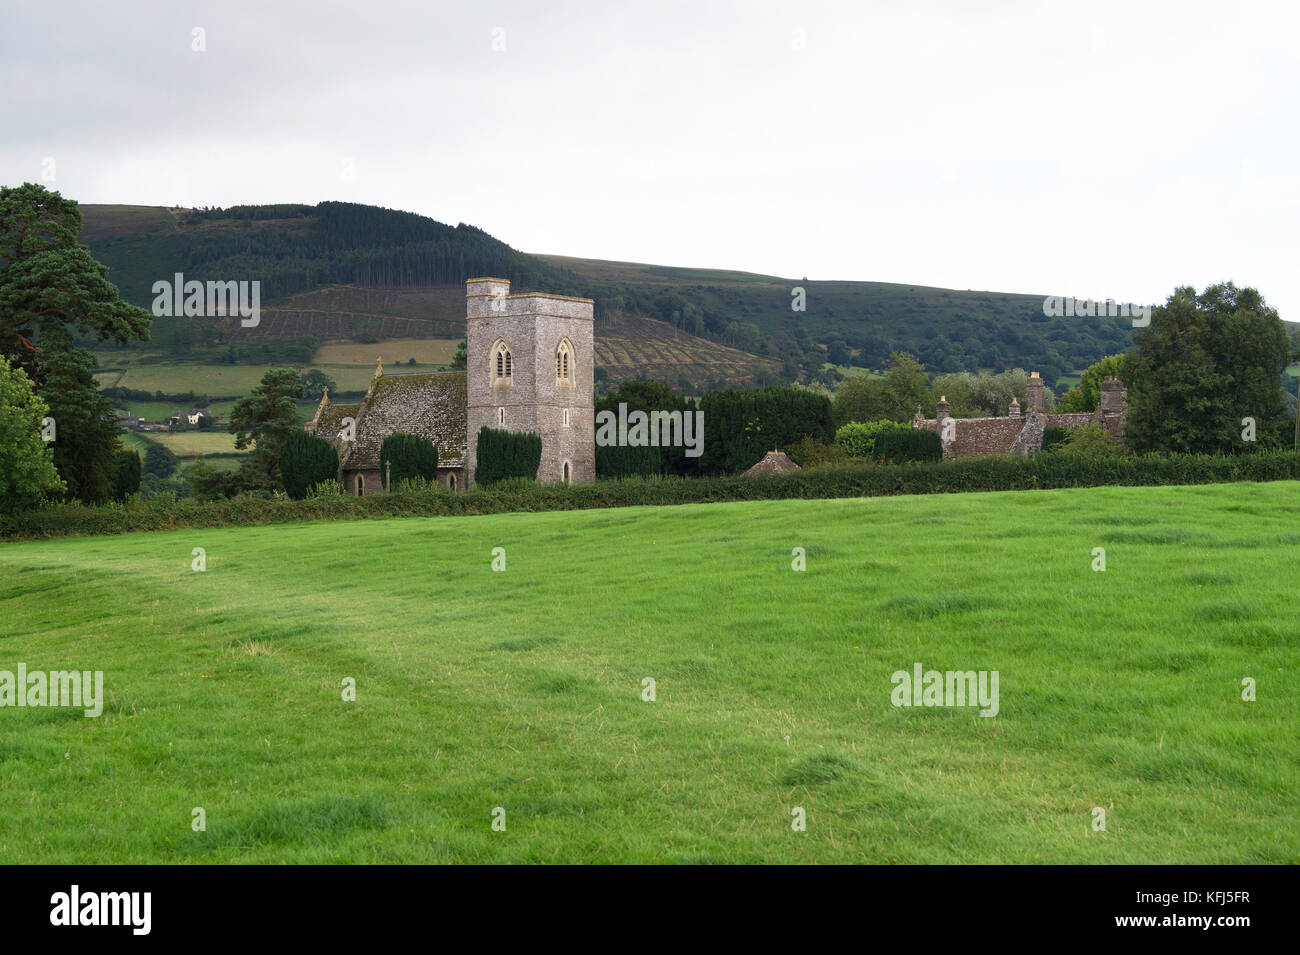 St Gastyn's Church at Llangasty Talyllyn, close to the shore of Llangorse Lake seen in the distance. Stock Photo